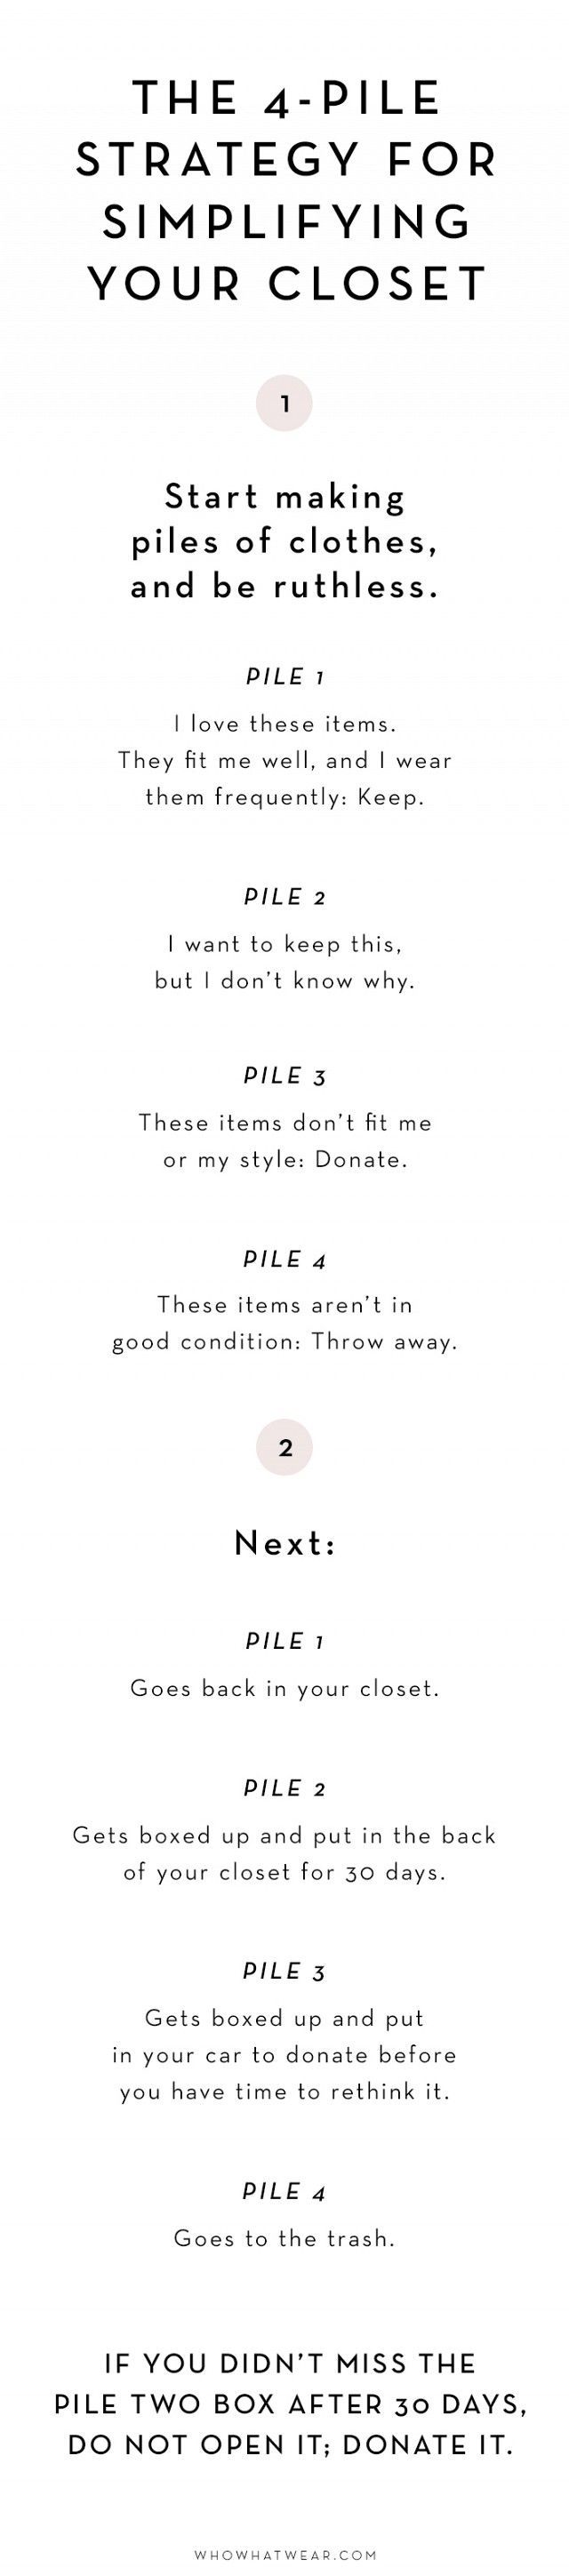 The 4-Pile Strategy for Simplifying Your Wardrobe via @Who What Wear